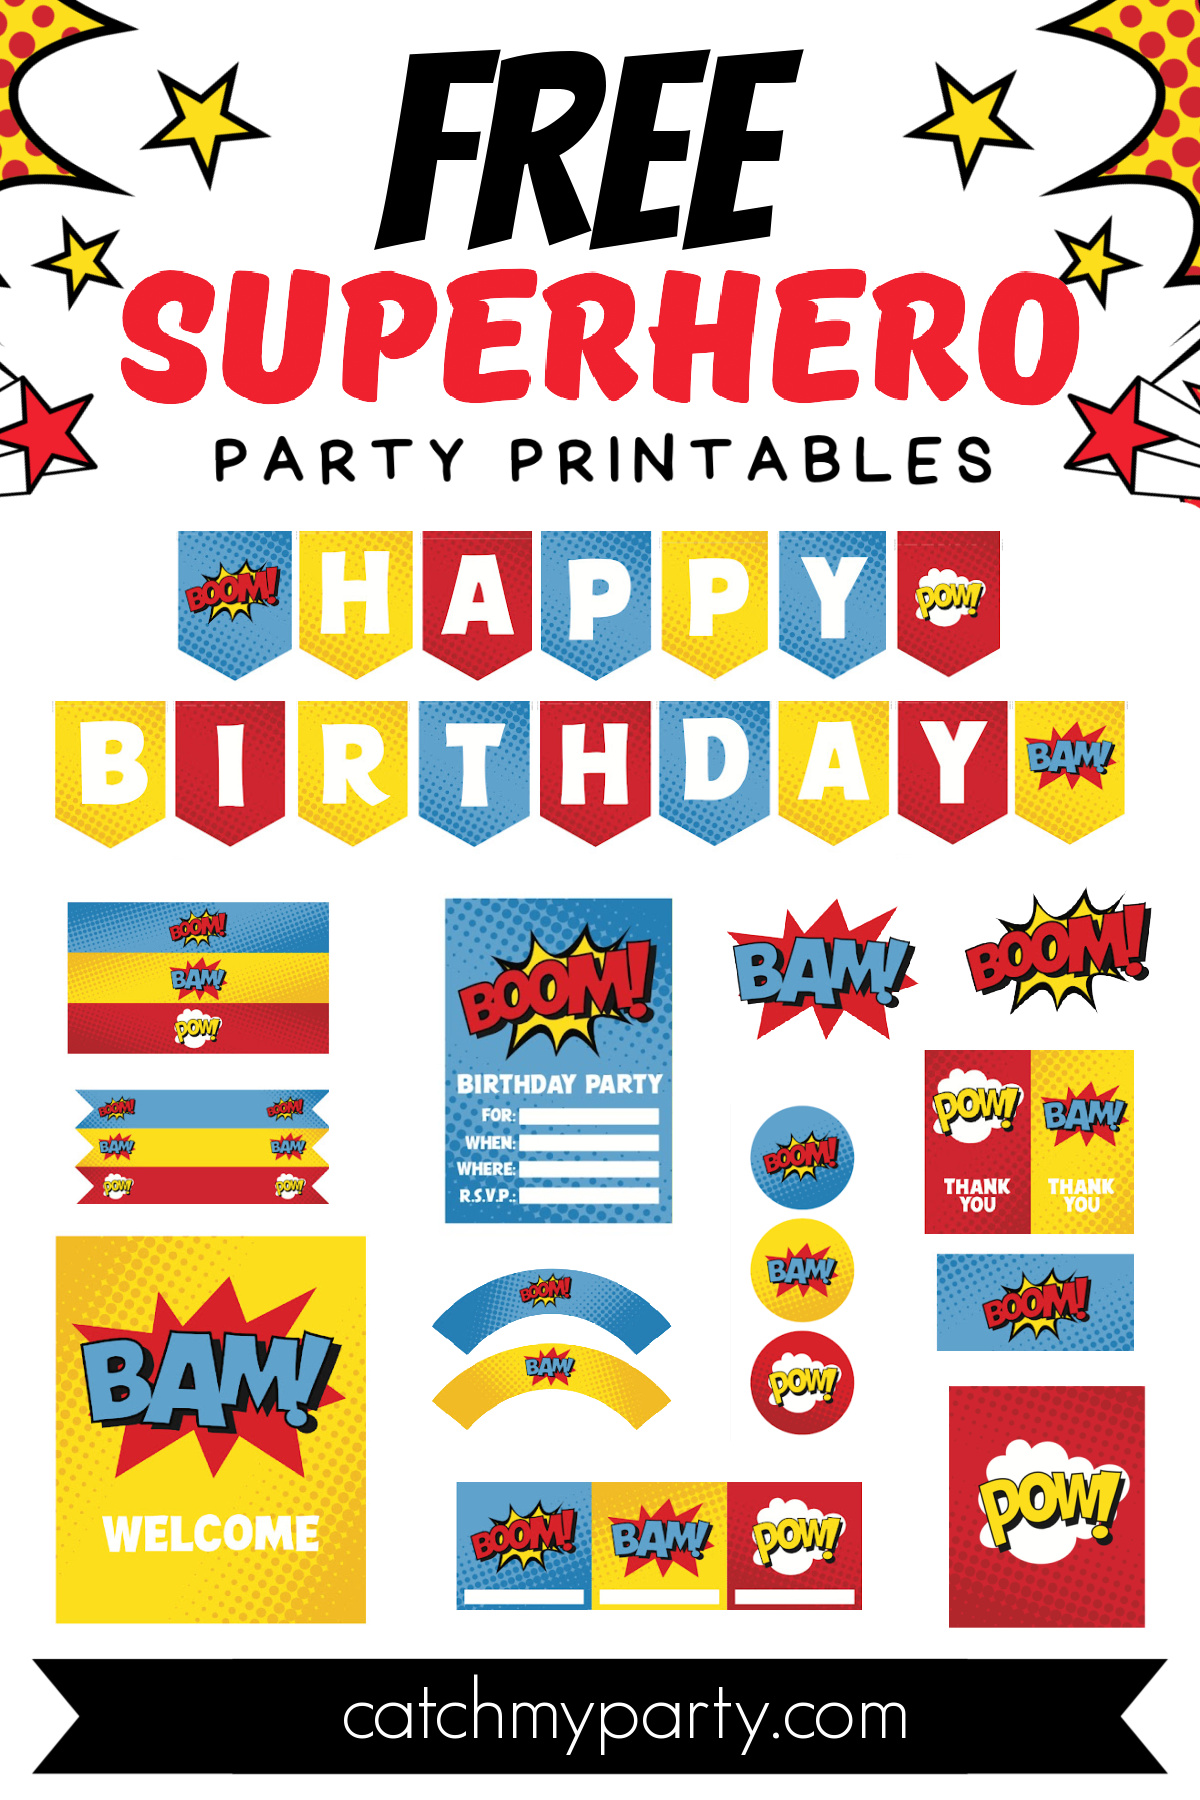 Download These Awesome Free Superhero Party Printables!